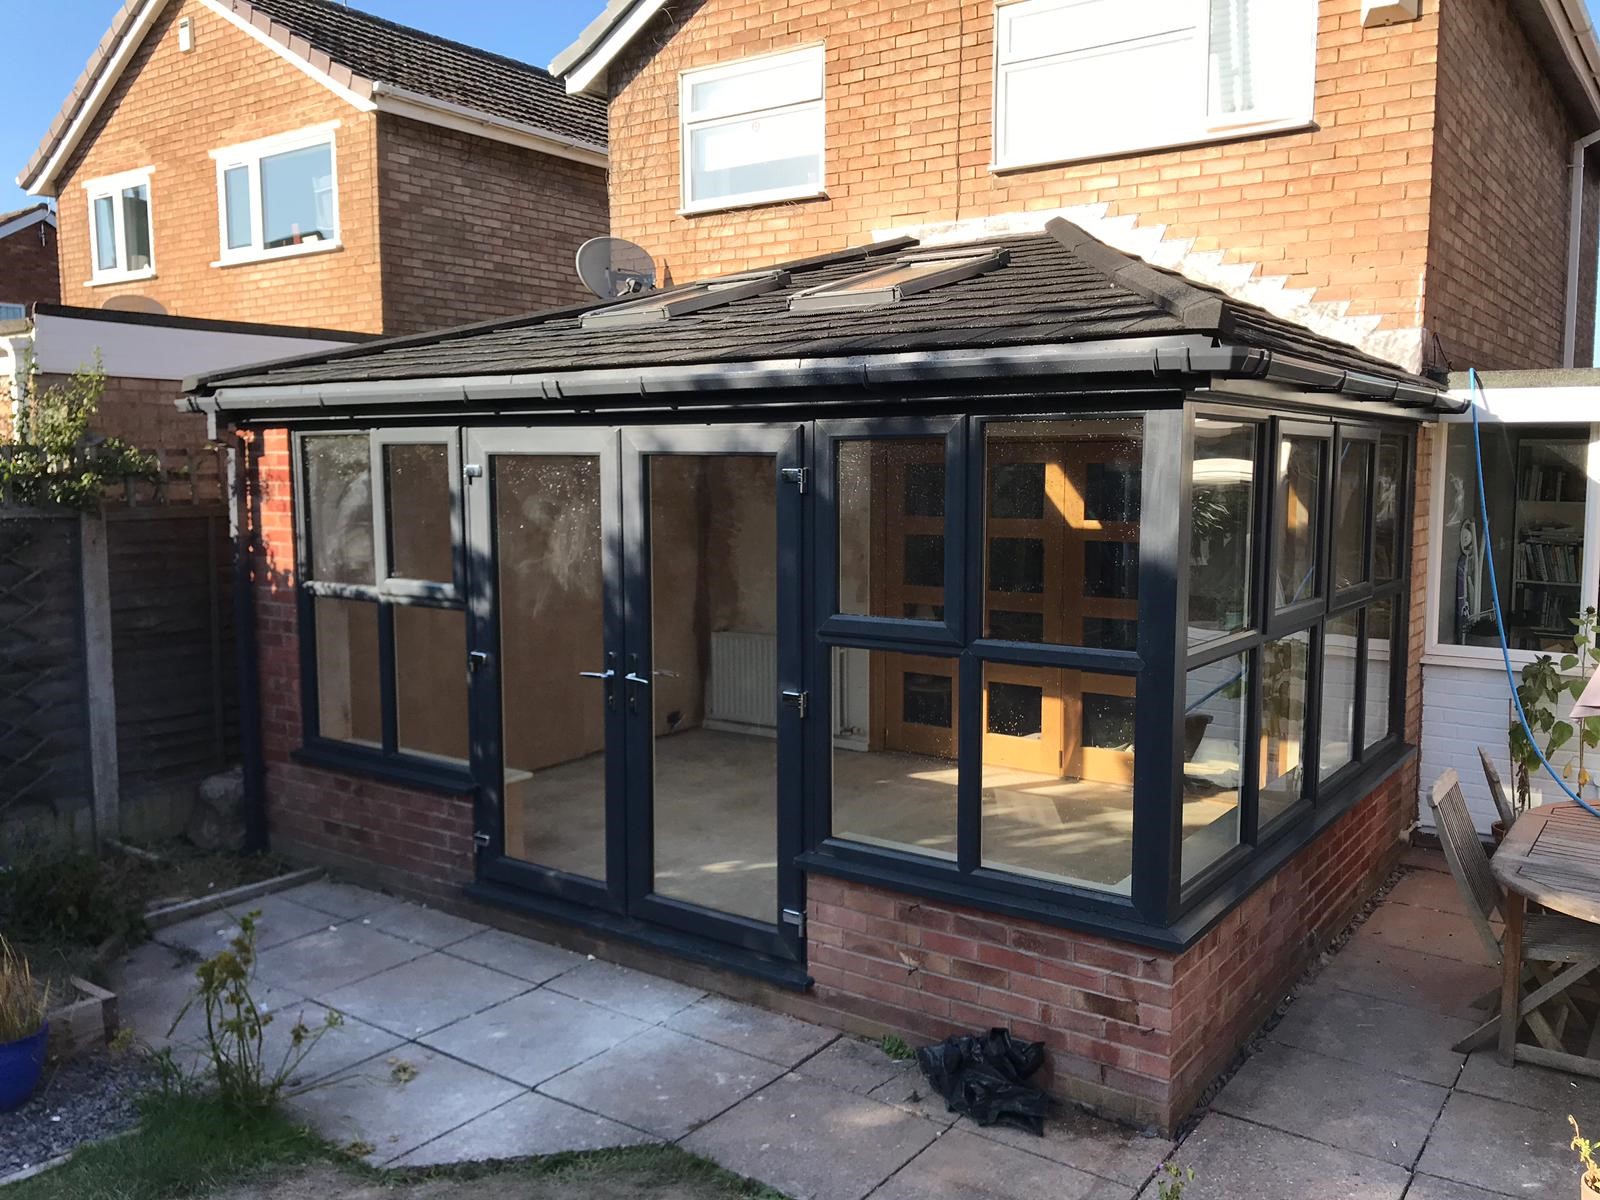 Safe and Sound recent Conservatory Installations